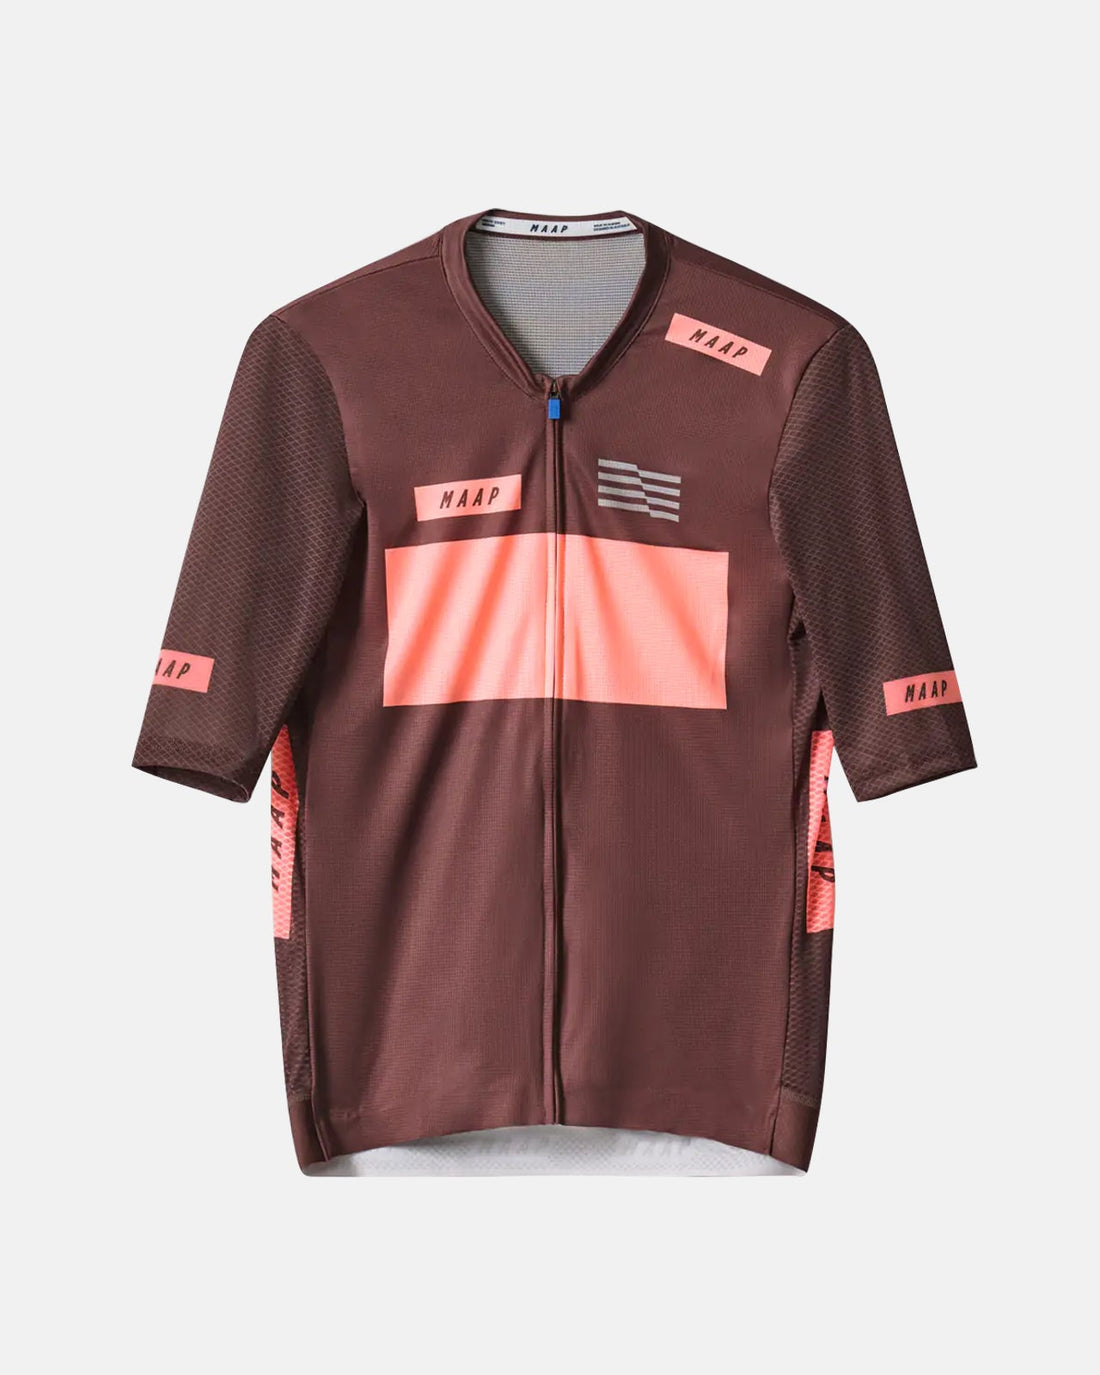 System Pro Air Jersey - Muscat